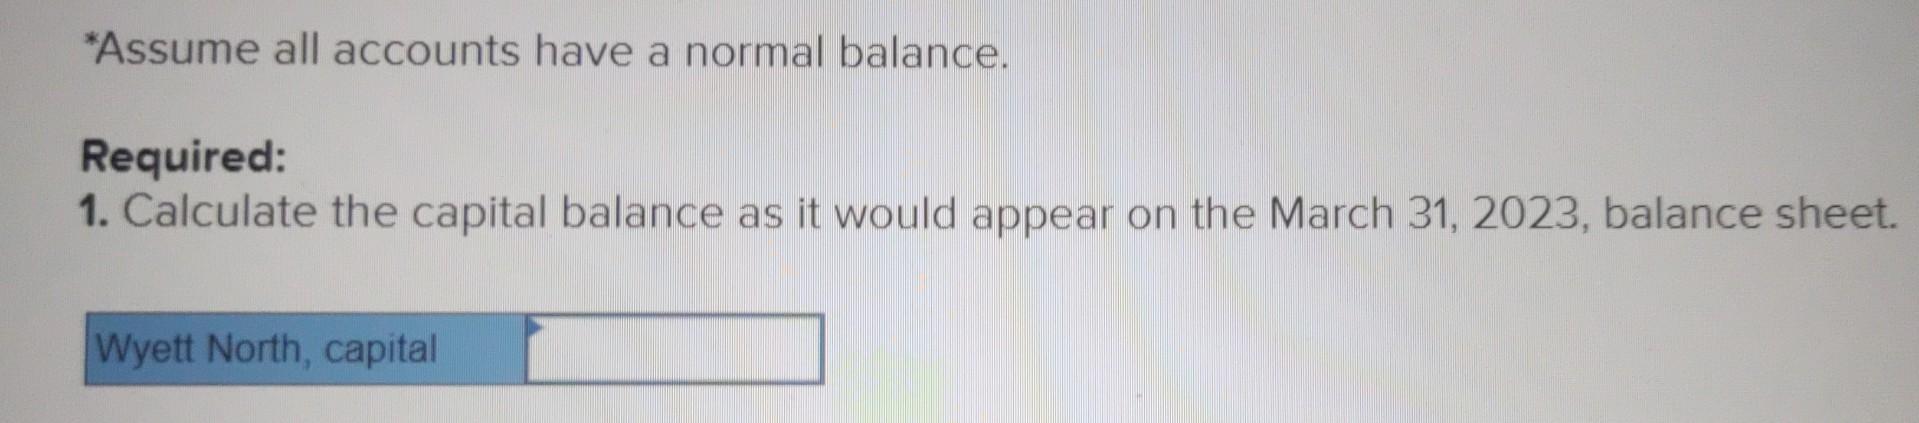 *Assume all accounts have a normal balance.
Required:
1. Calculate the capital balance as it would appear on the March 31,202